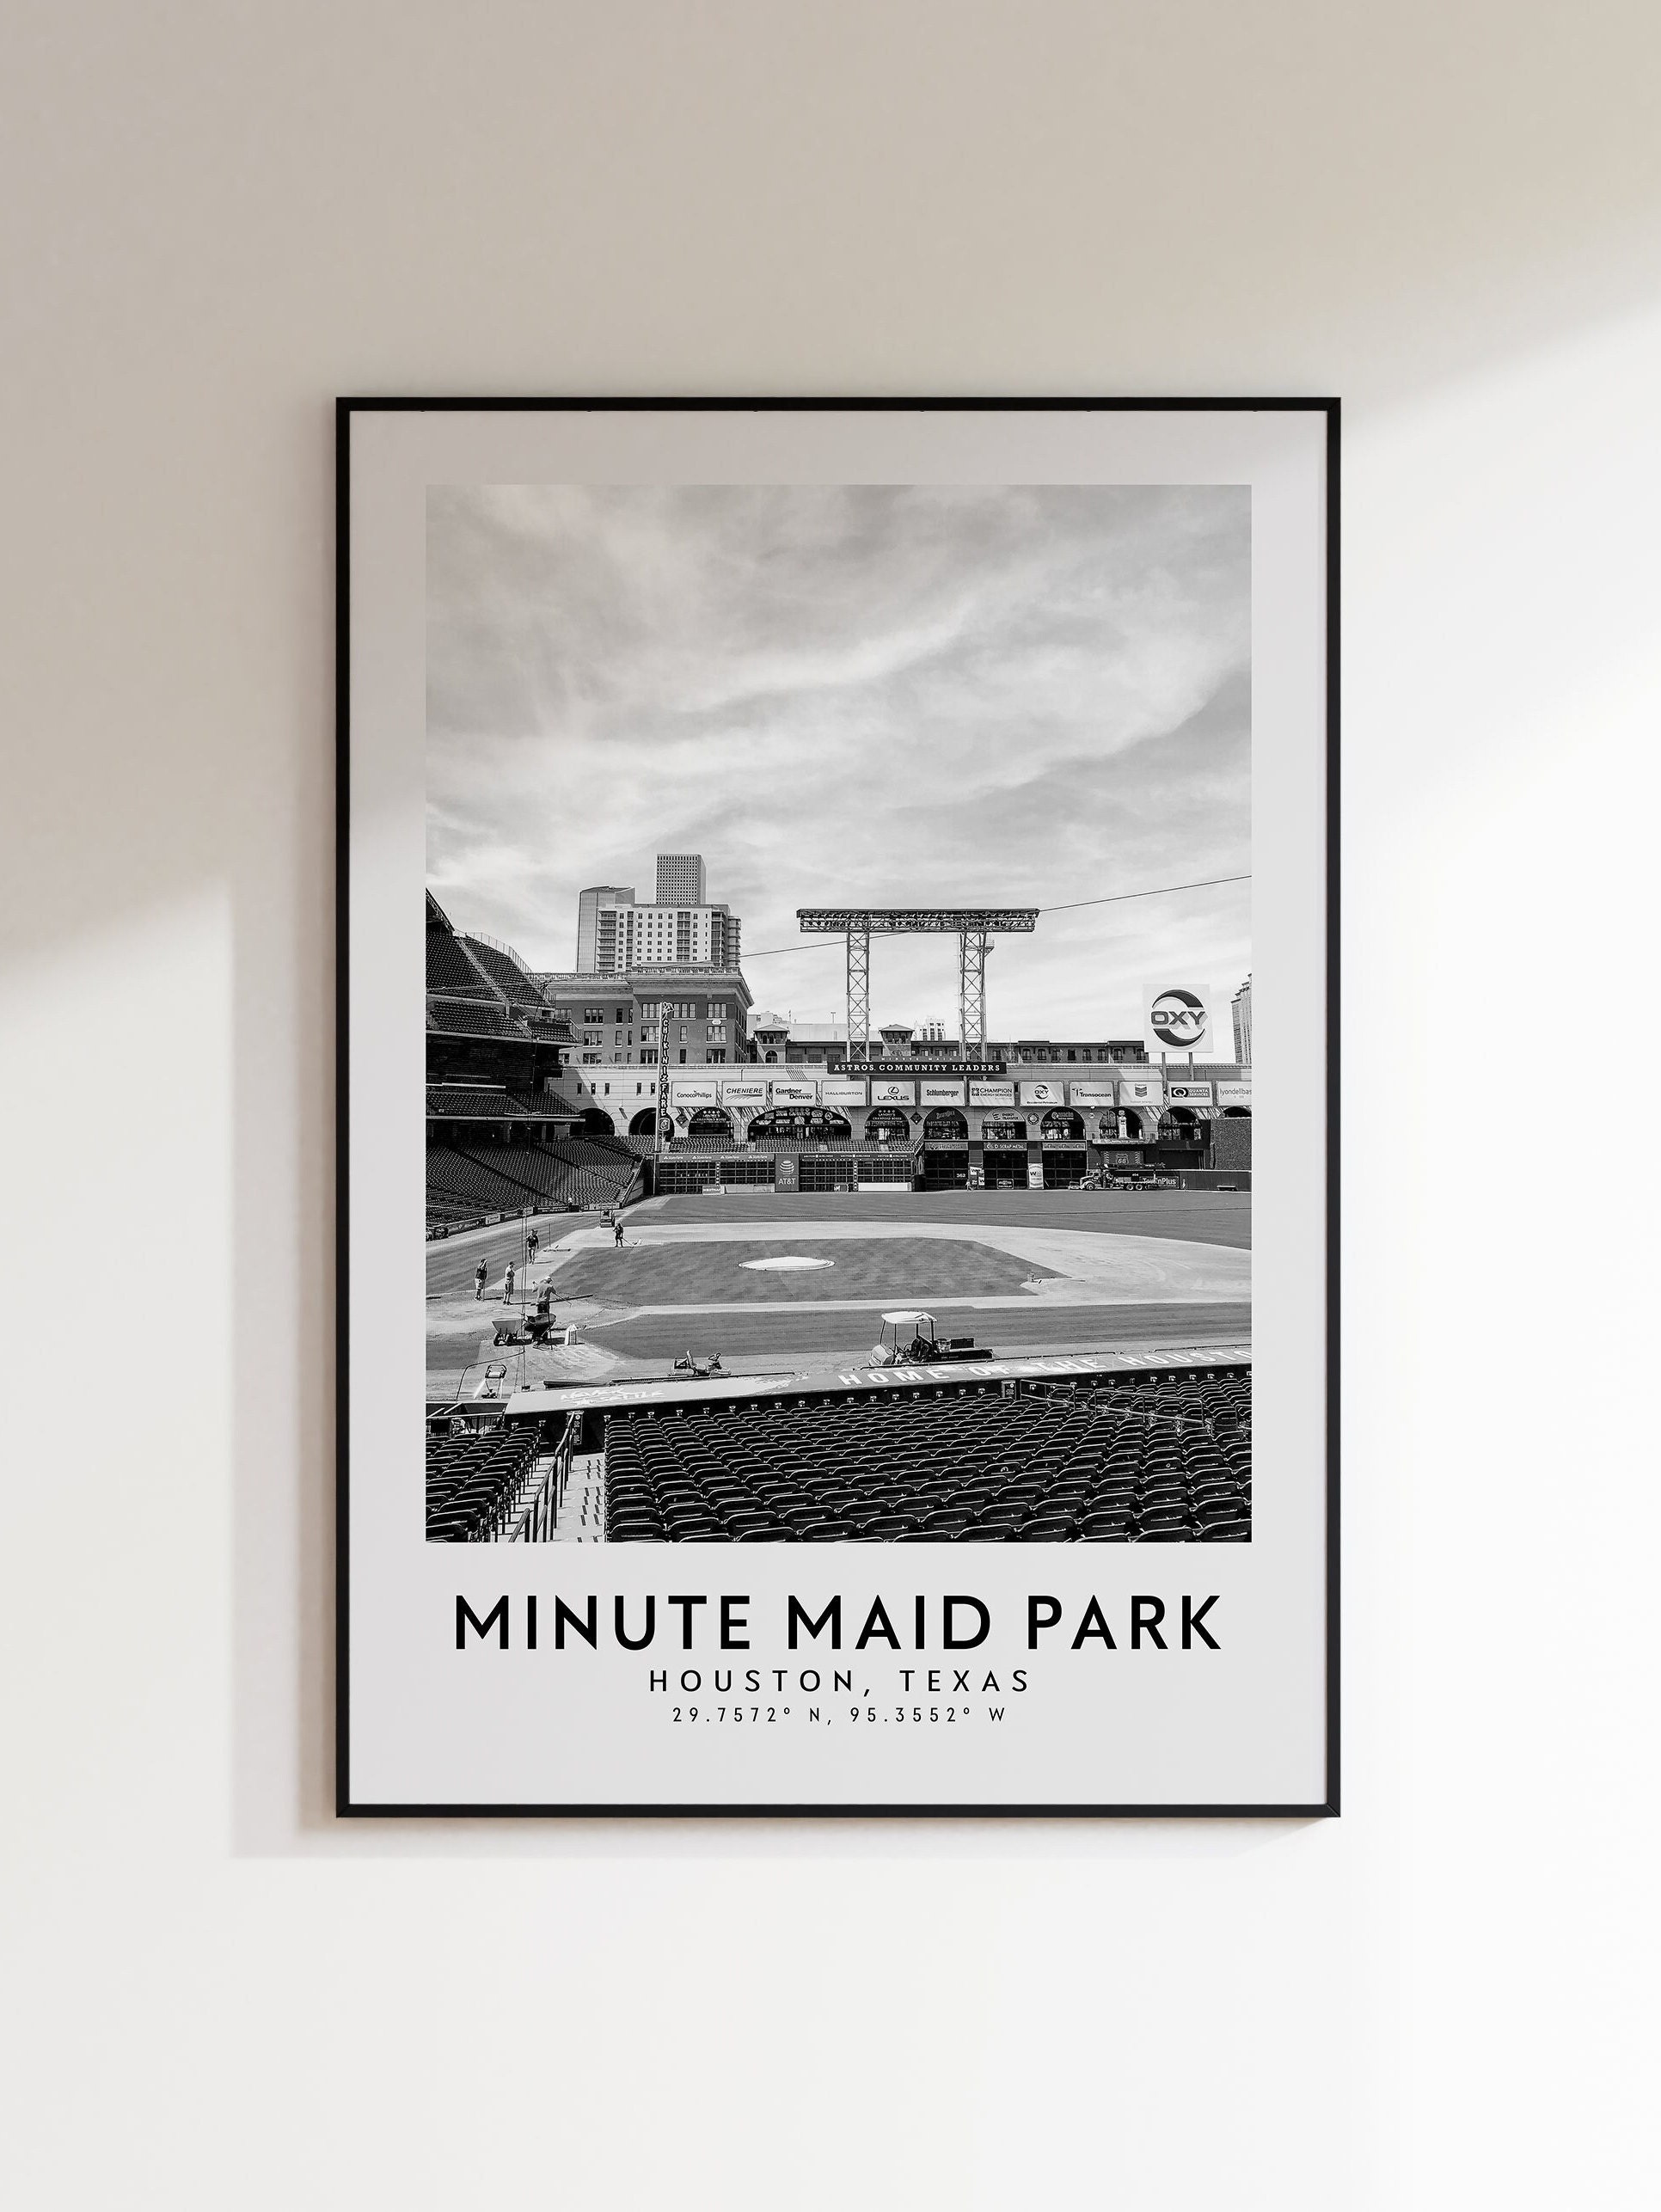  Minute Maid Park Stadium At Night Art Canvas Stadium Wall Art  Decor Living Room Kitchen Home Decoration Wall Canvas Framed Ready To Hang  (Canvas, 8x12): Posters & Prints